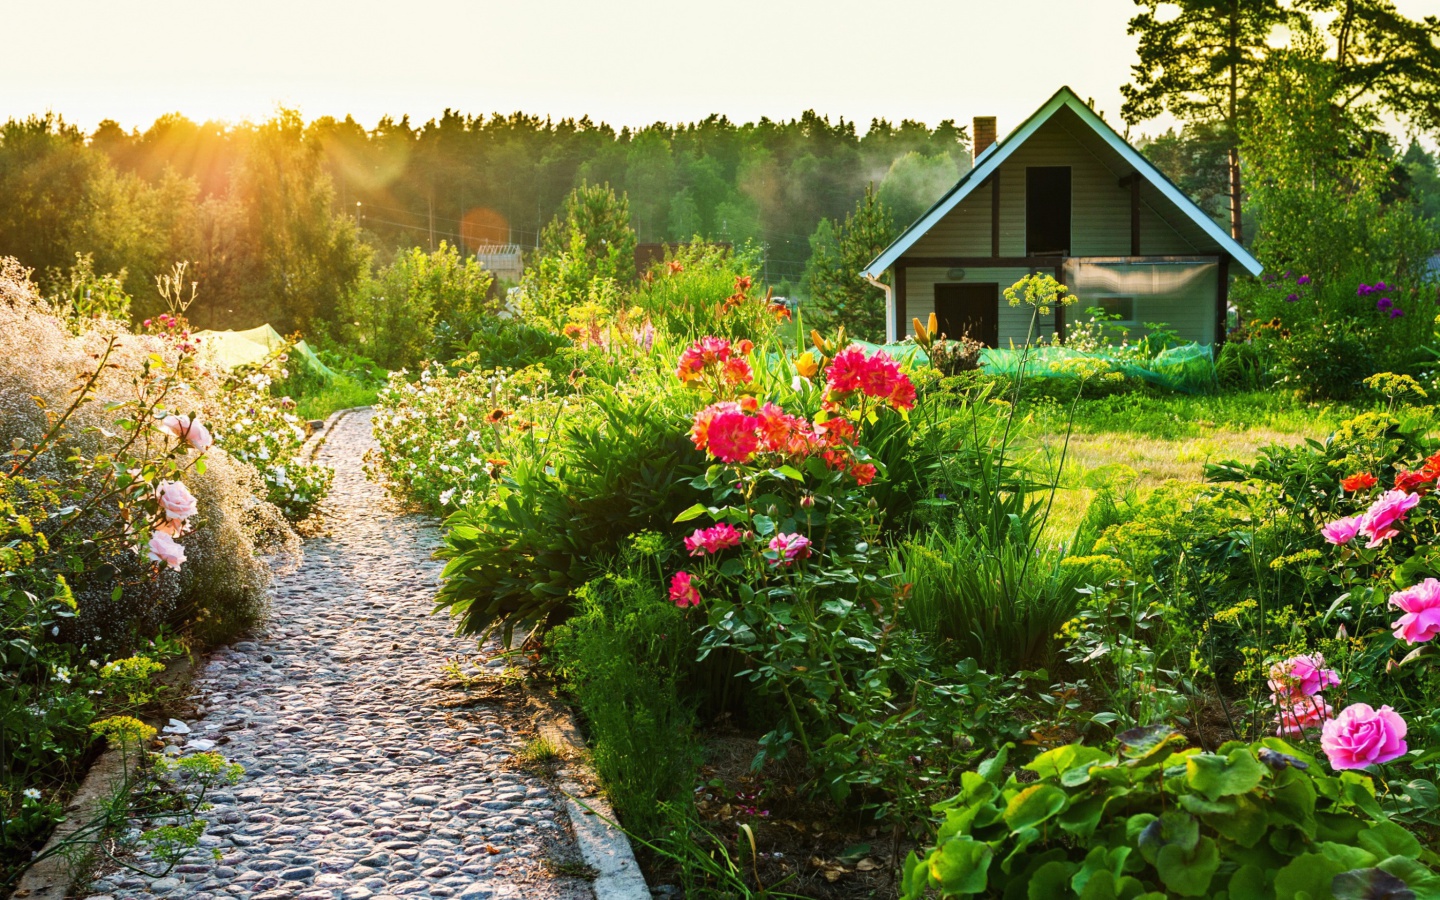 Country house with flowers screenshot #1 1440x900